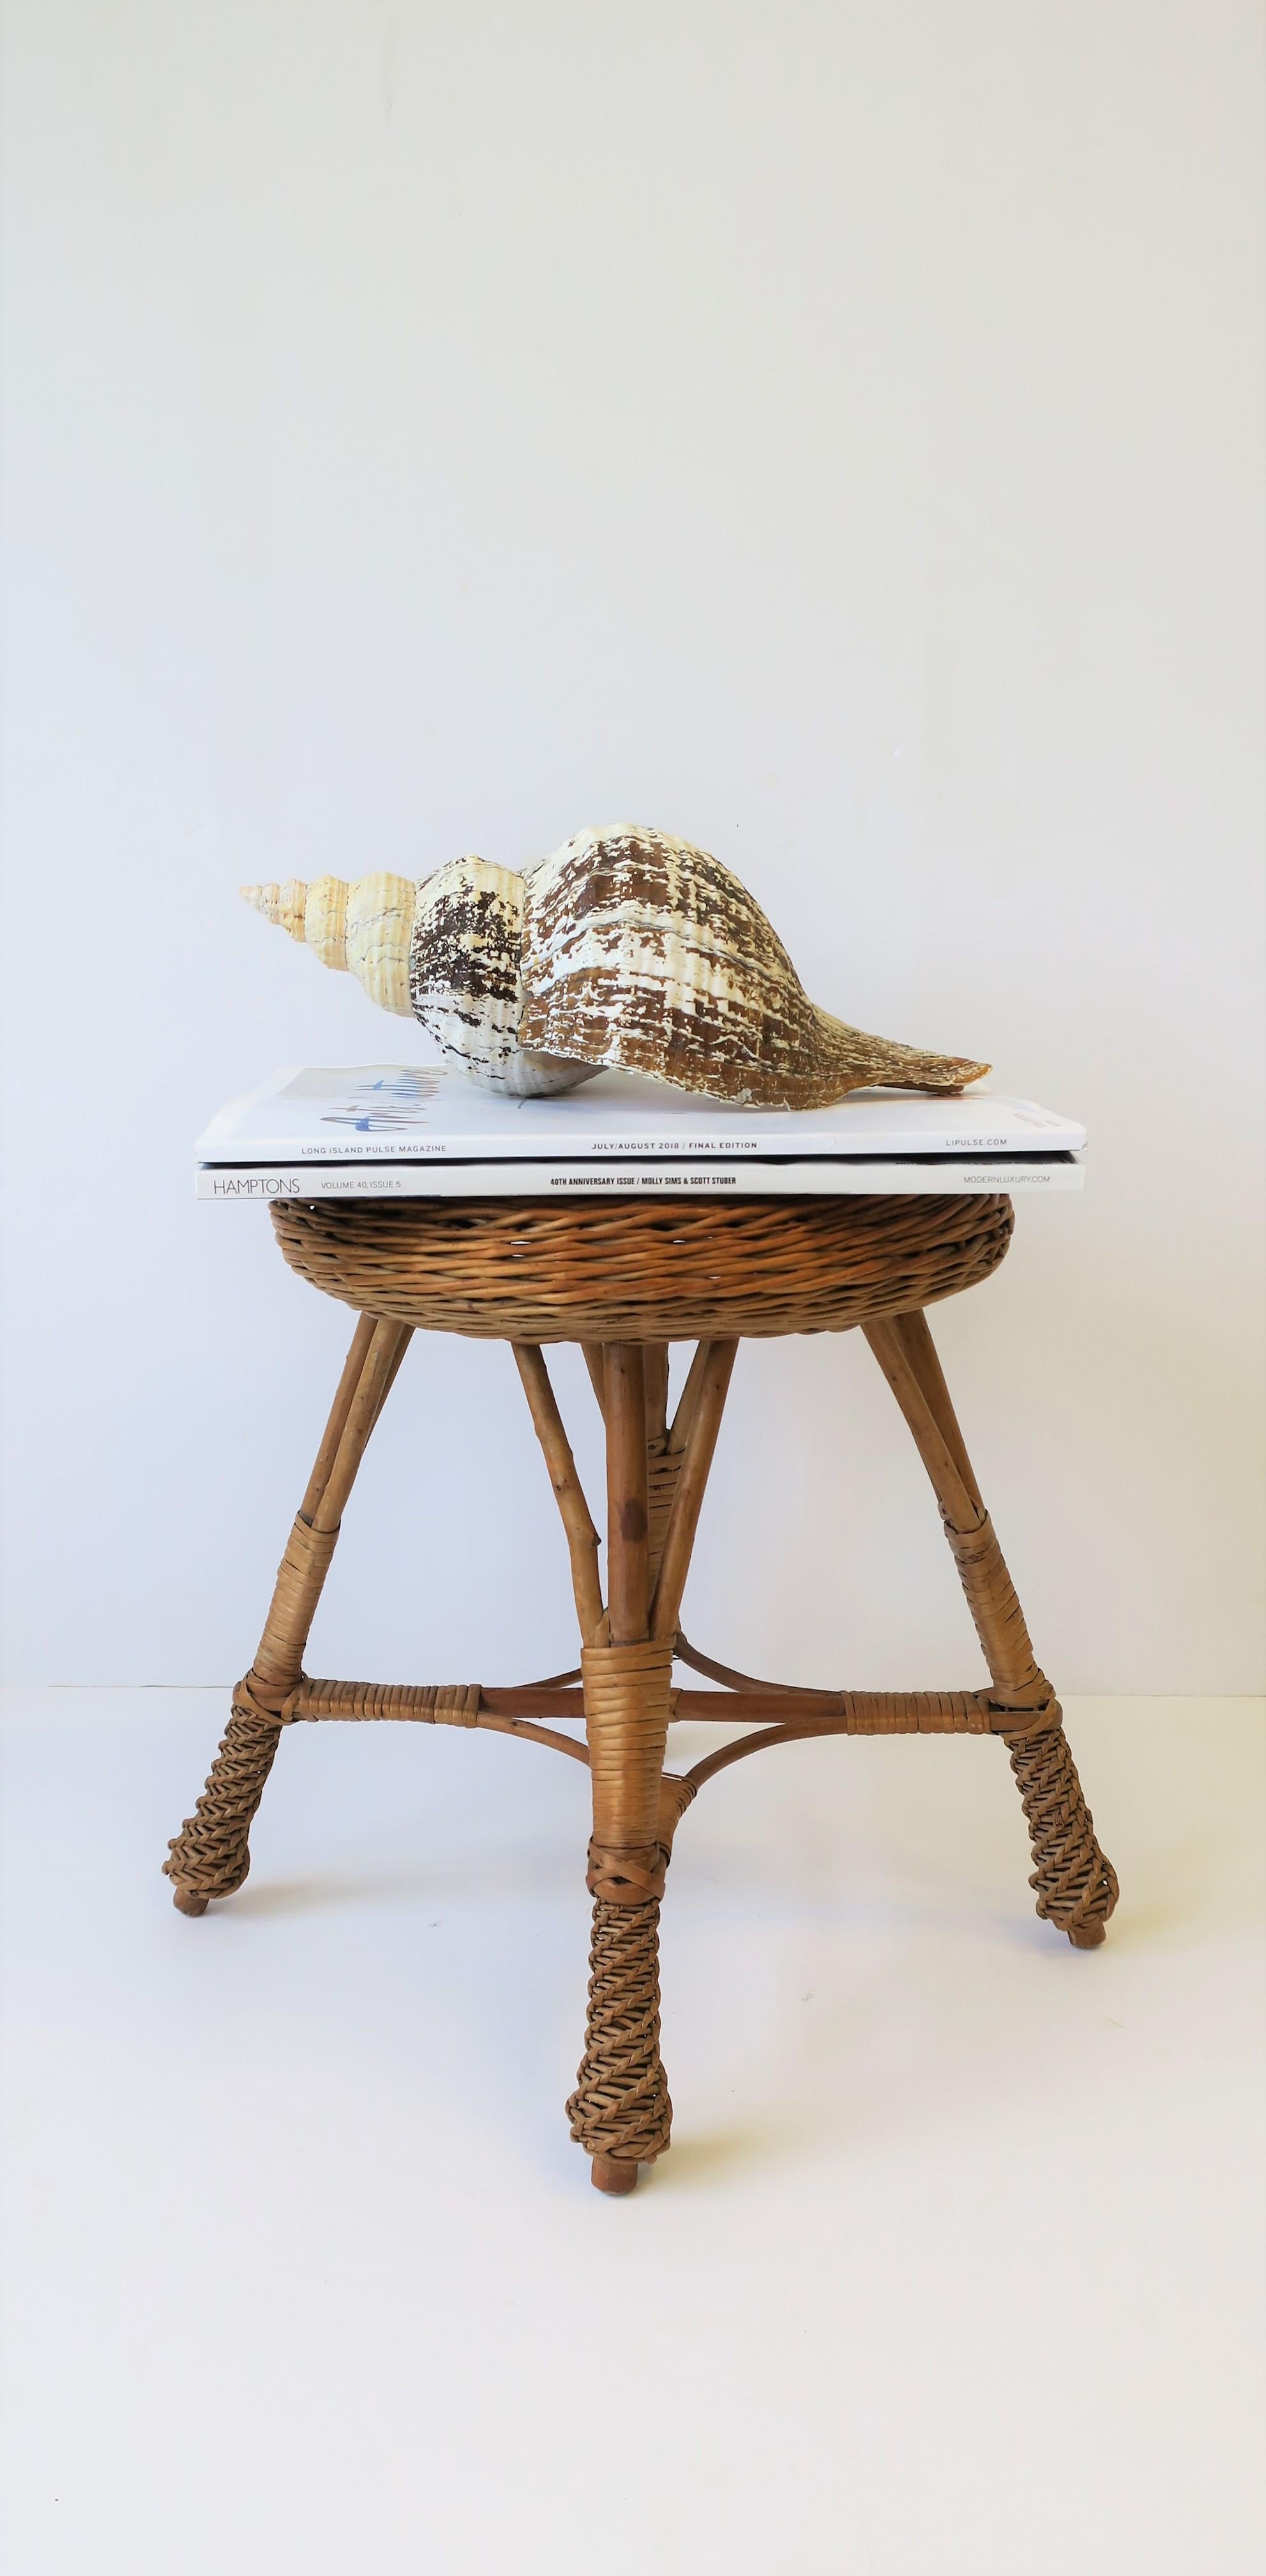 Mid-20th Century Midcentury Wicker Rattan and Wood Stool or Side Table